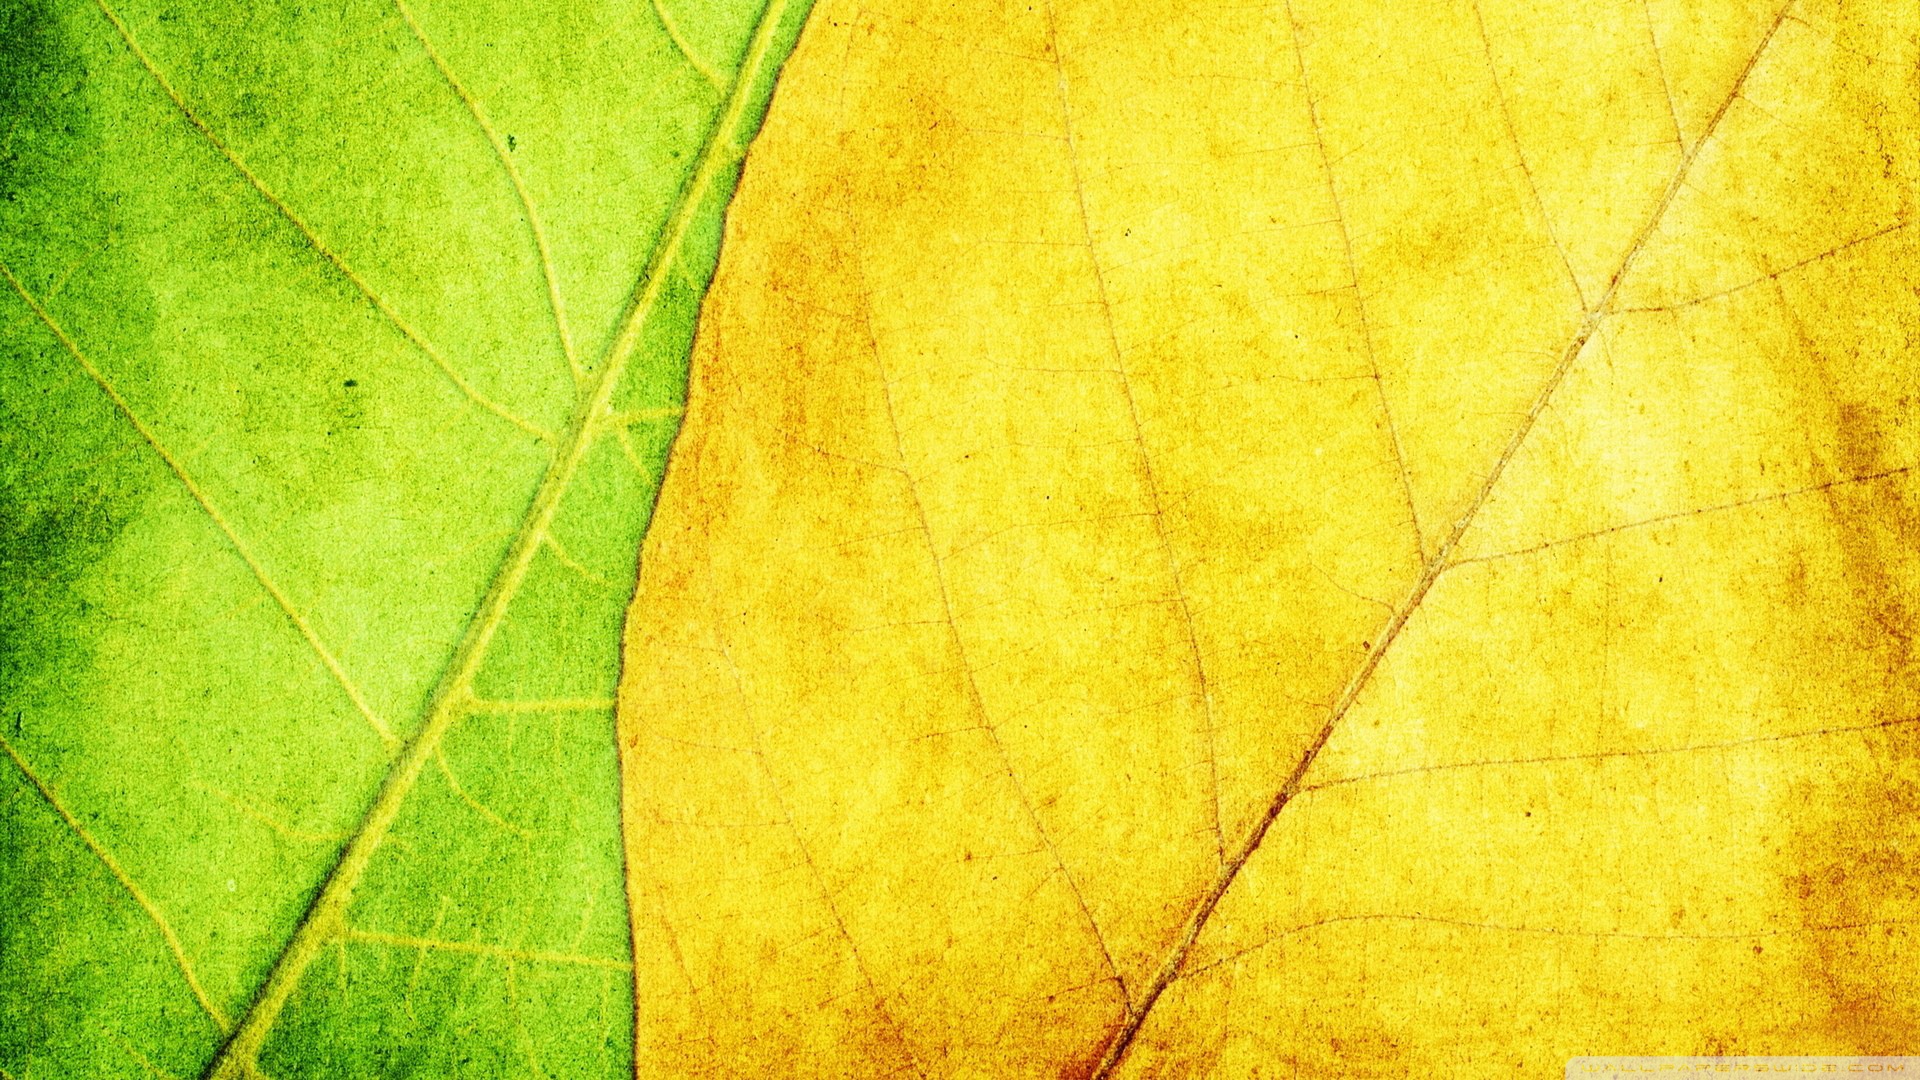 Green And Yellow Leaves Texture ❤ 4K HD Desktop Wallpaper for 4K ...